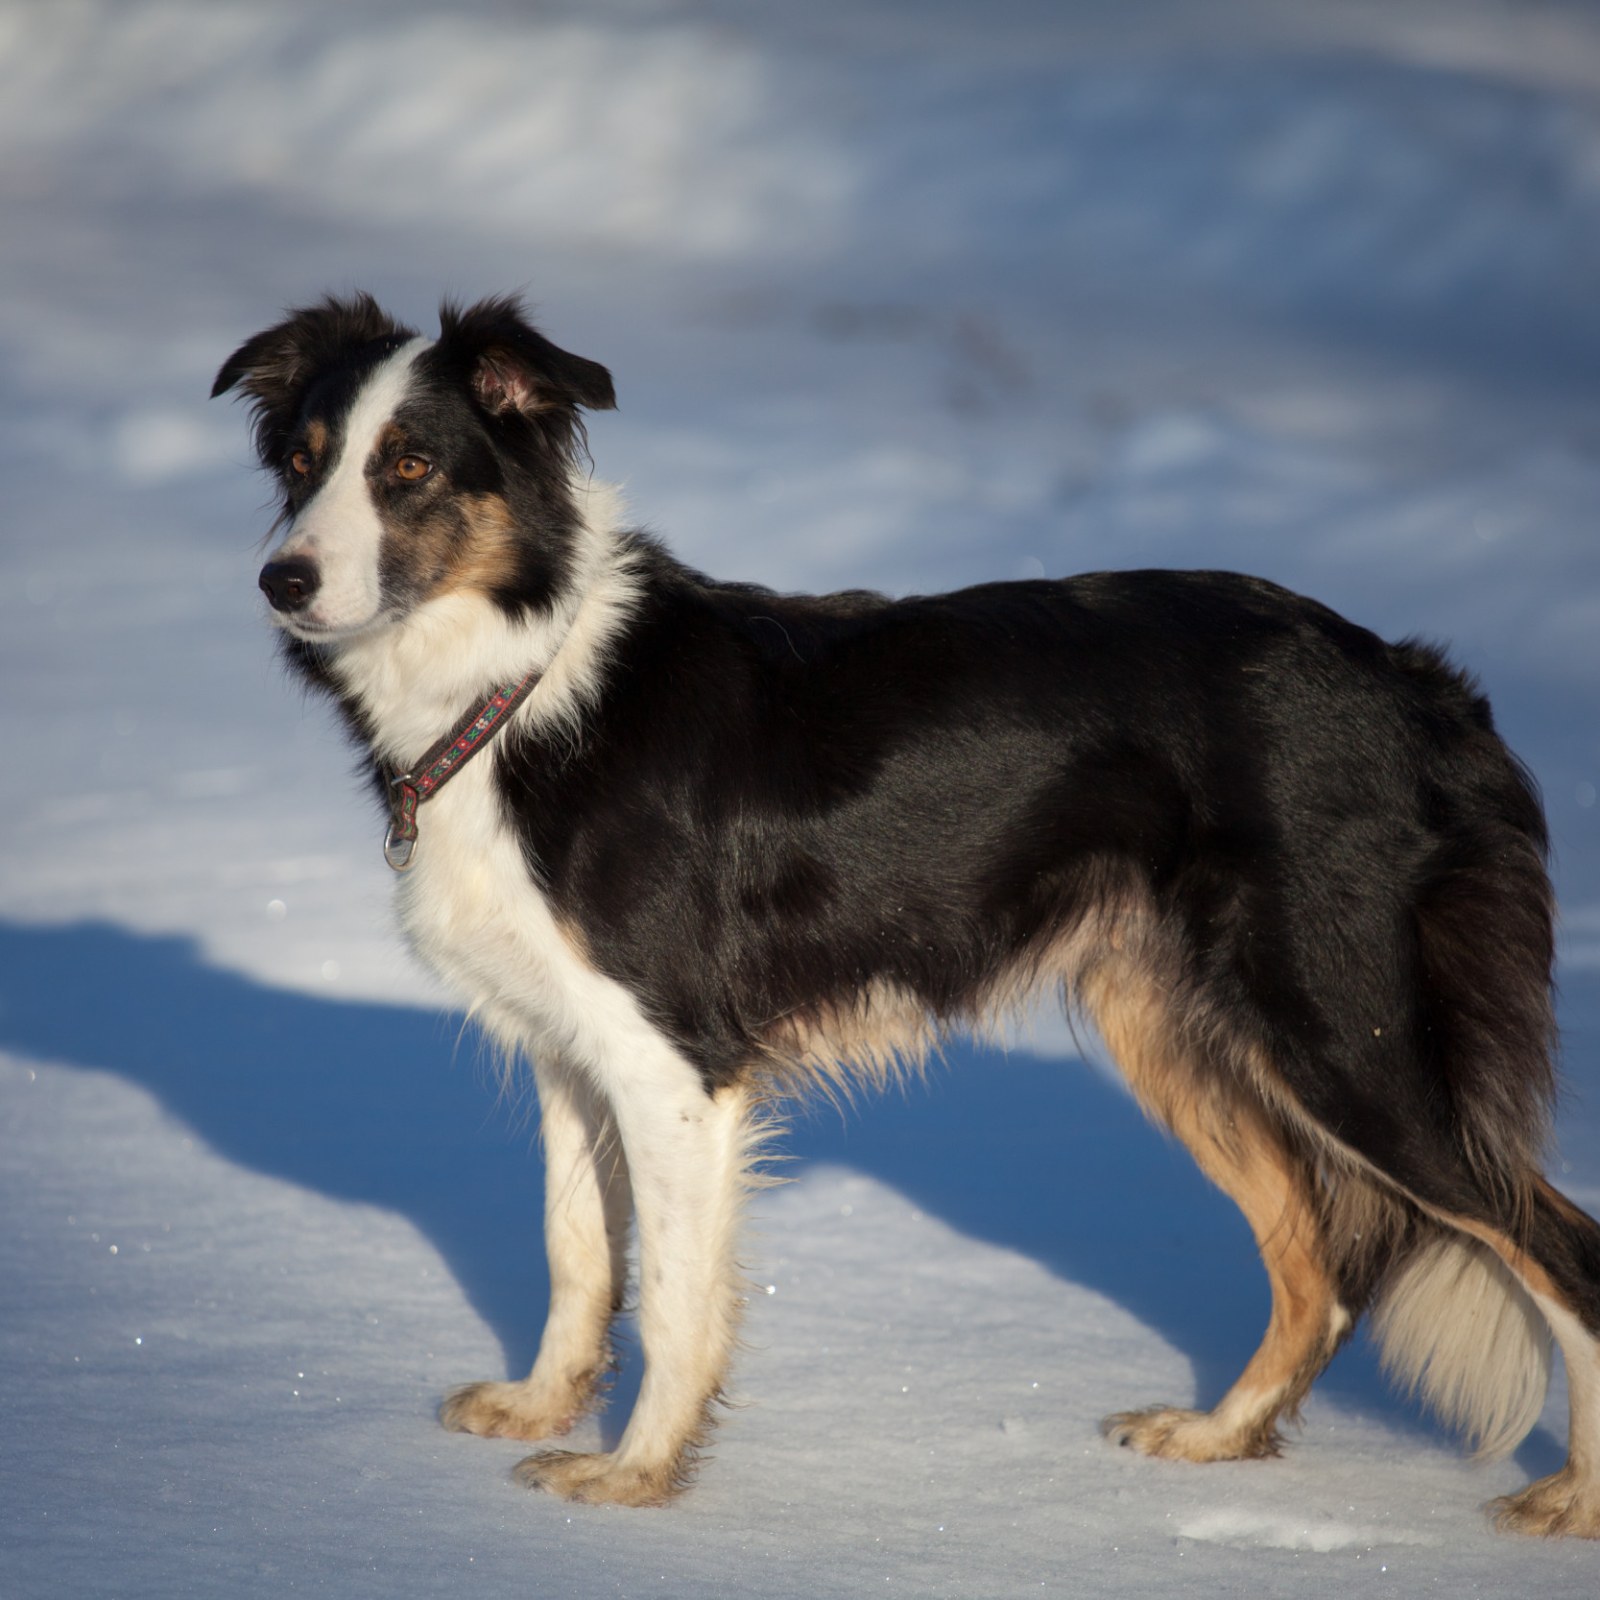 Border Collie Copies Owner and Tries To Break Ice on Lake in Adorable Clip